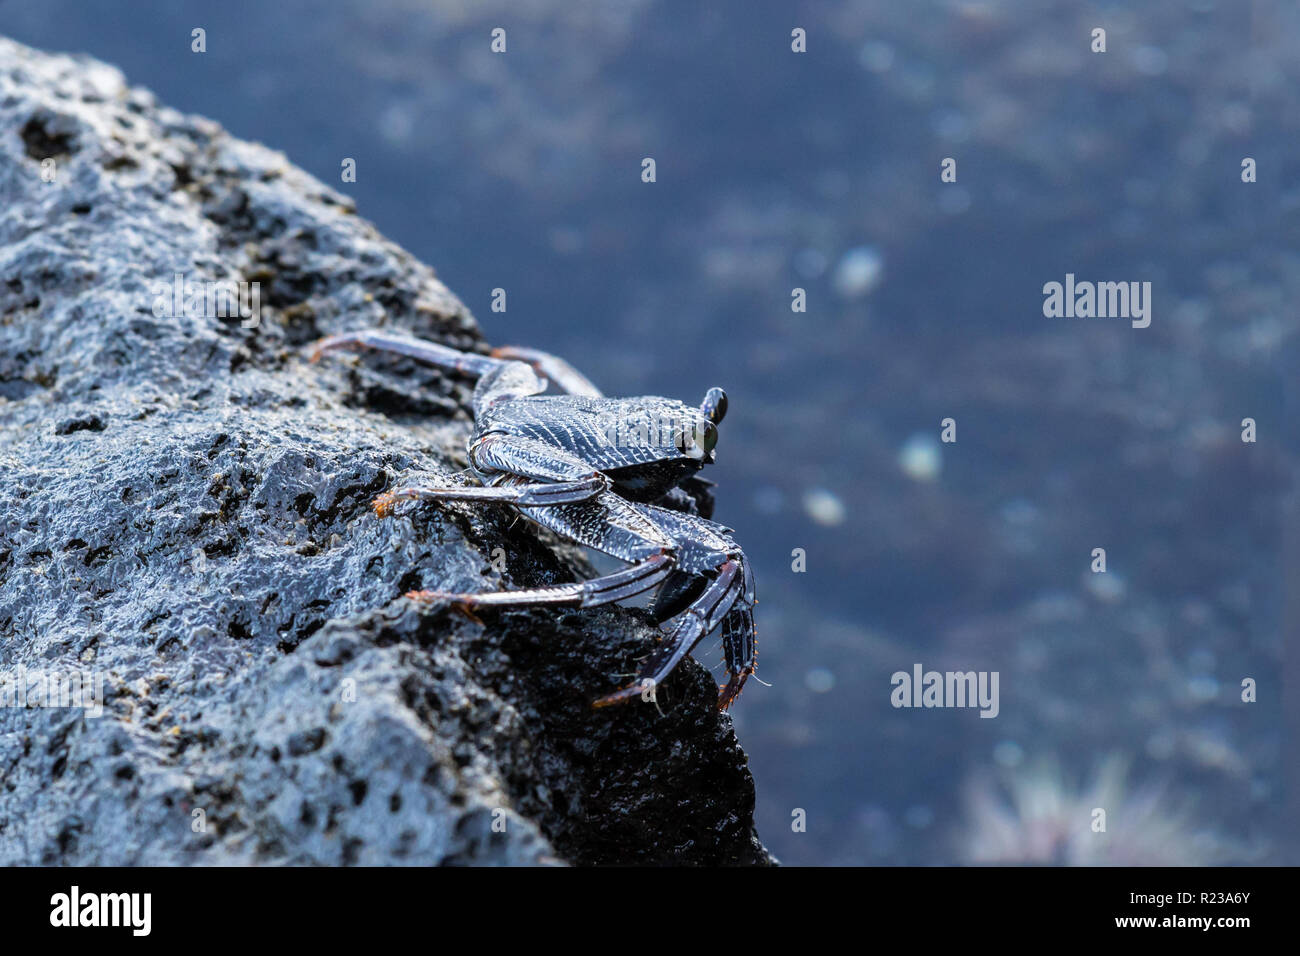 Closeup of crab standing on volcanic rock in Kona, Hawaii. Eyes extended; tidal pool with anemone is in the background. Stock Photo